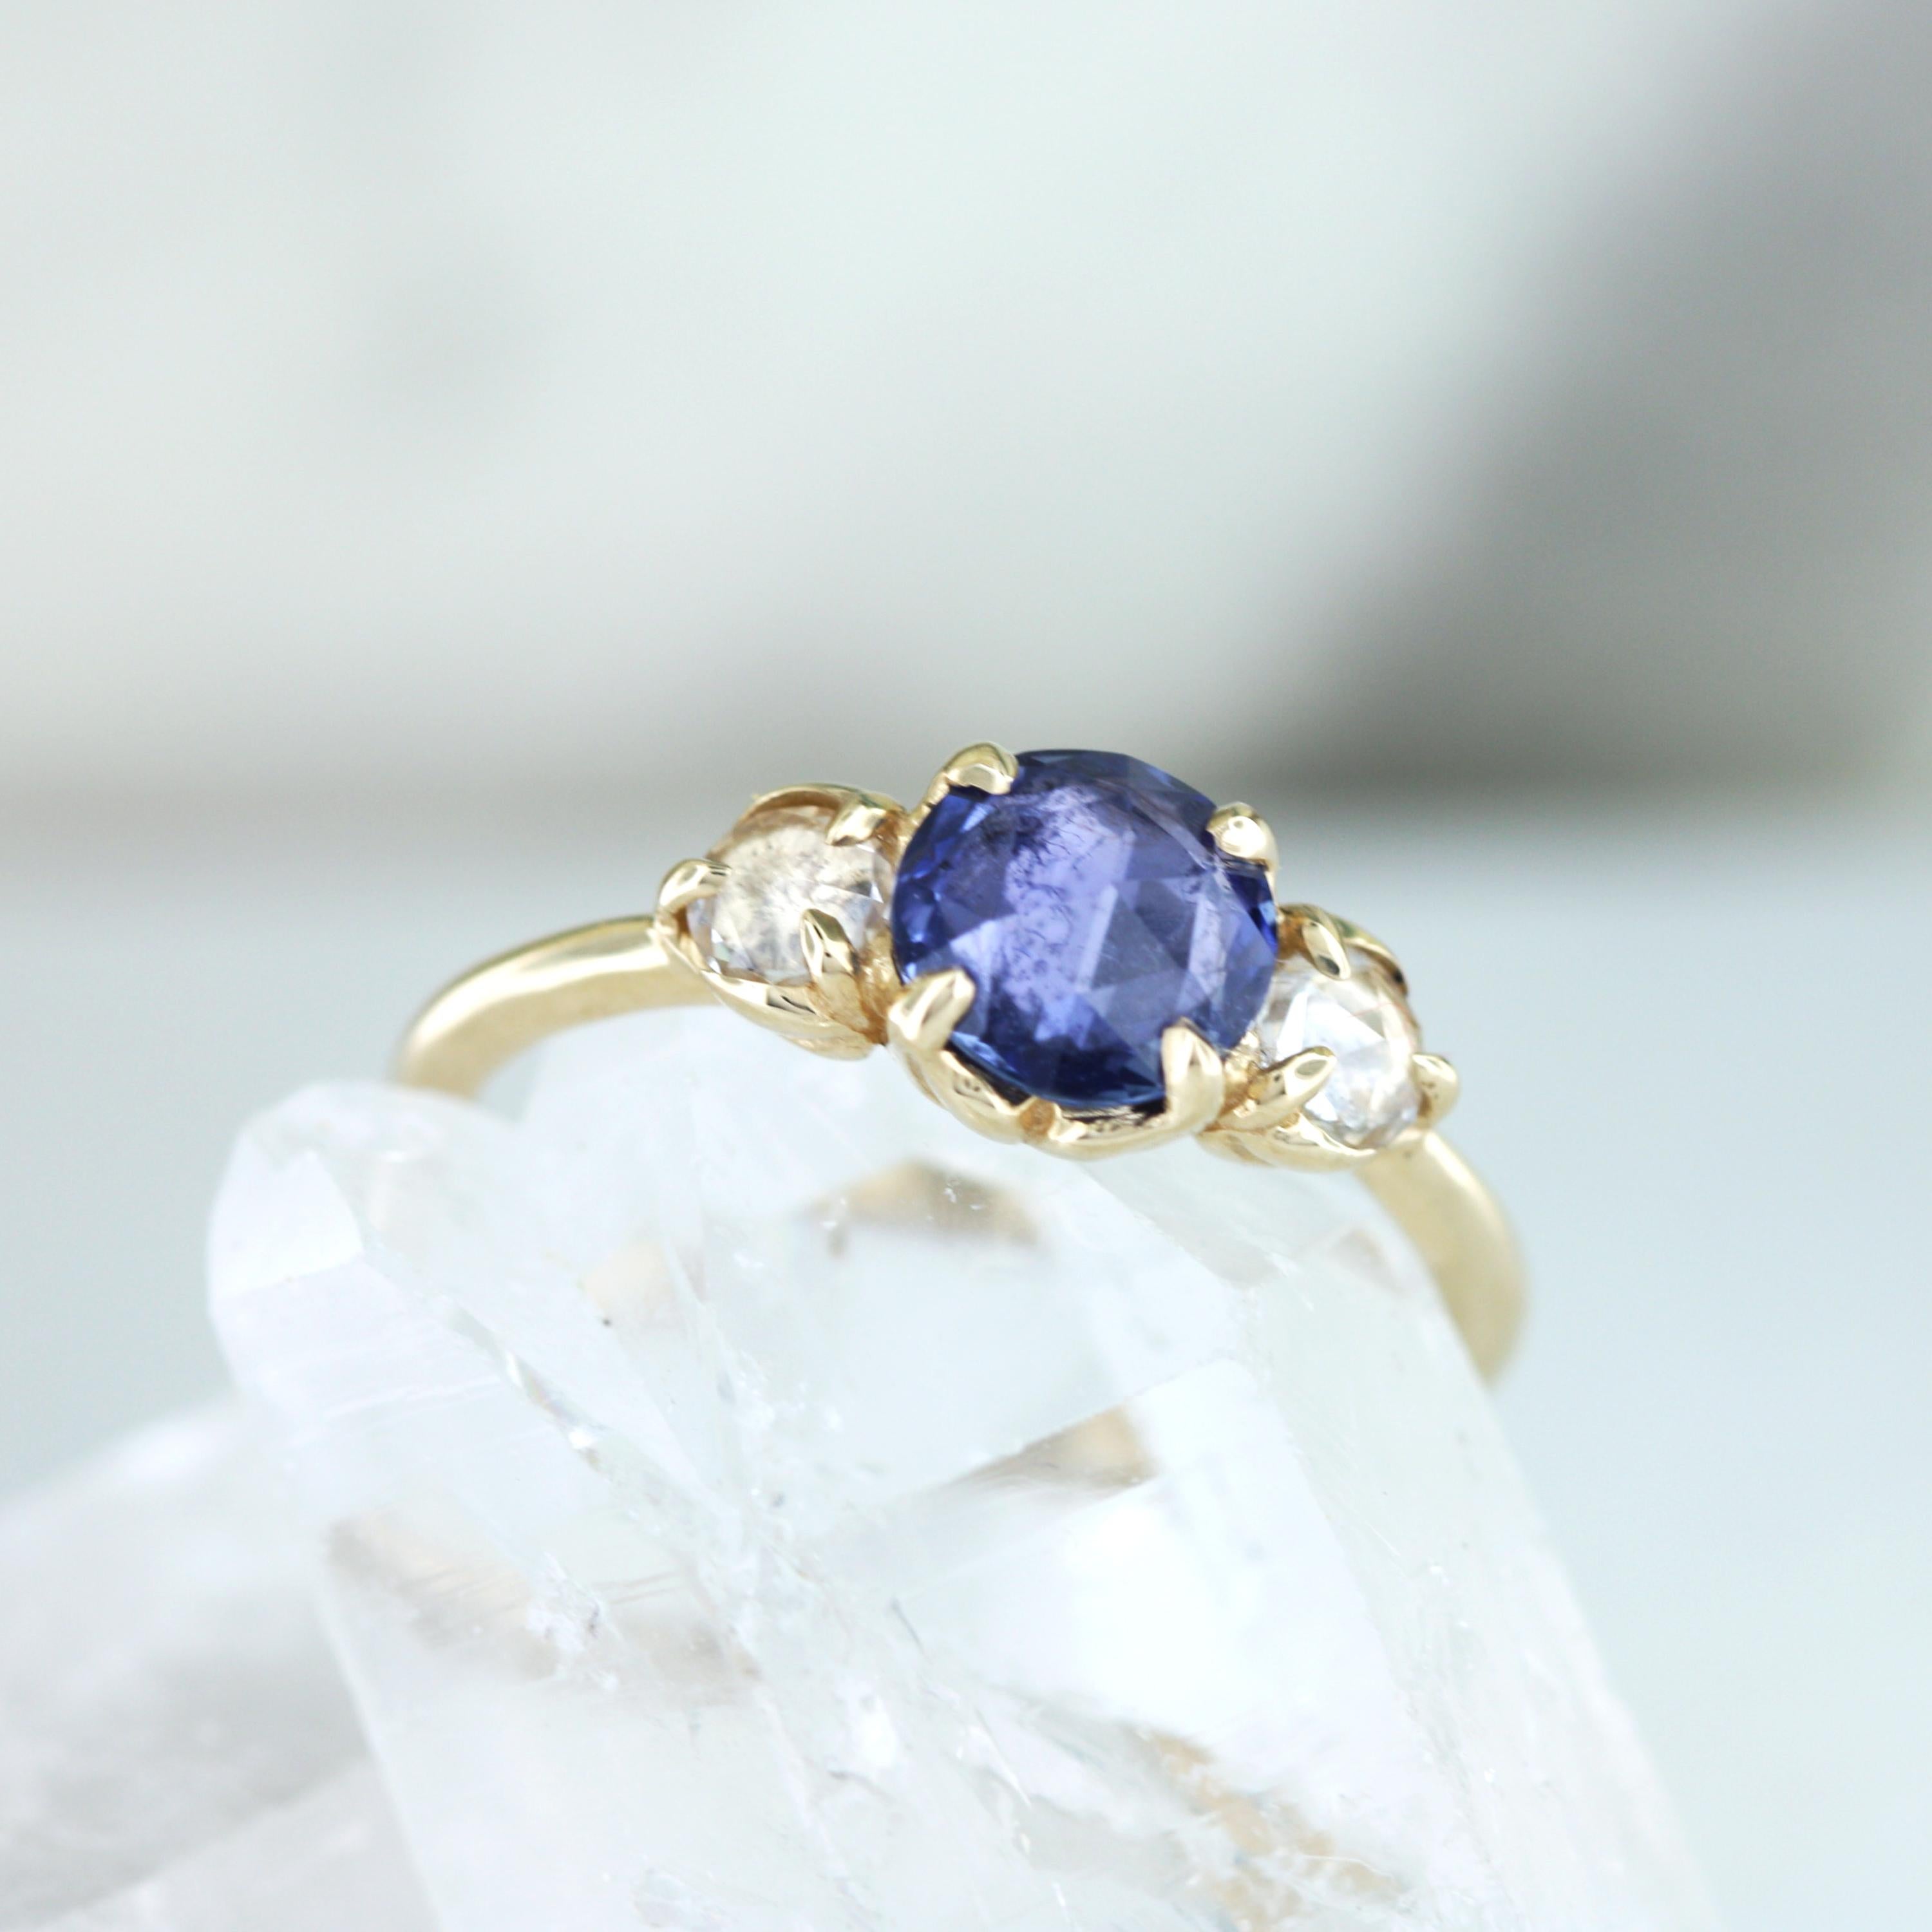 14K gold leaves curl up to hold these lovely rose cut sapphires, 1.2 carats in total. The glow and sheen on this ring is beautifully understated. 

- Finger size 6.25
- Available for customization
- Appraisals included